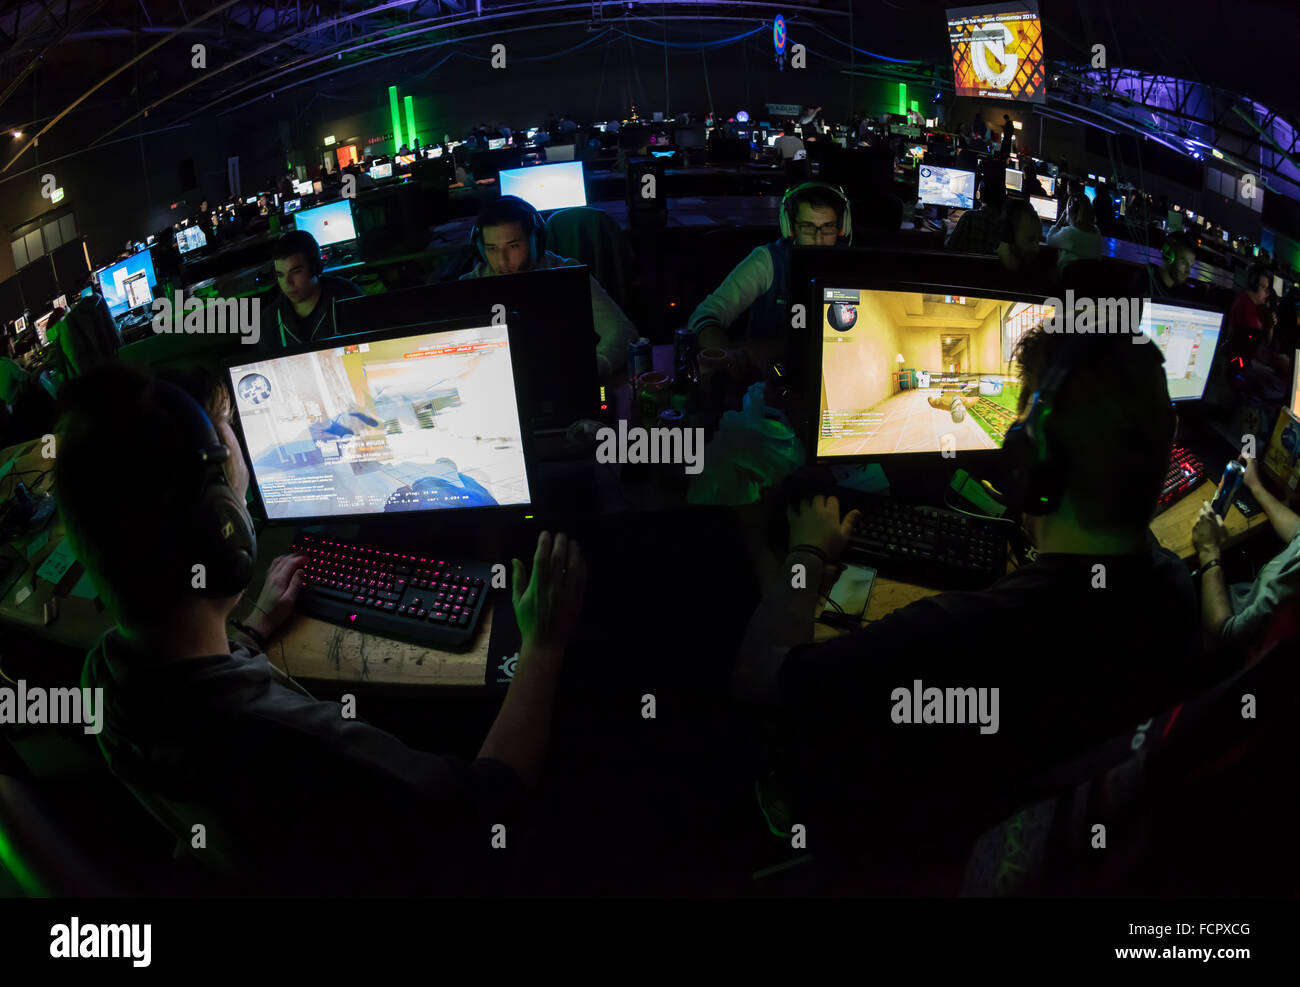 Computer game players are playing the first person shooter 'Counterstrike CS:GO' at a computer game tournament. Stock Photo